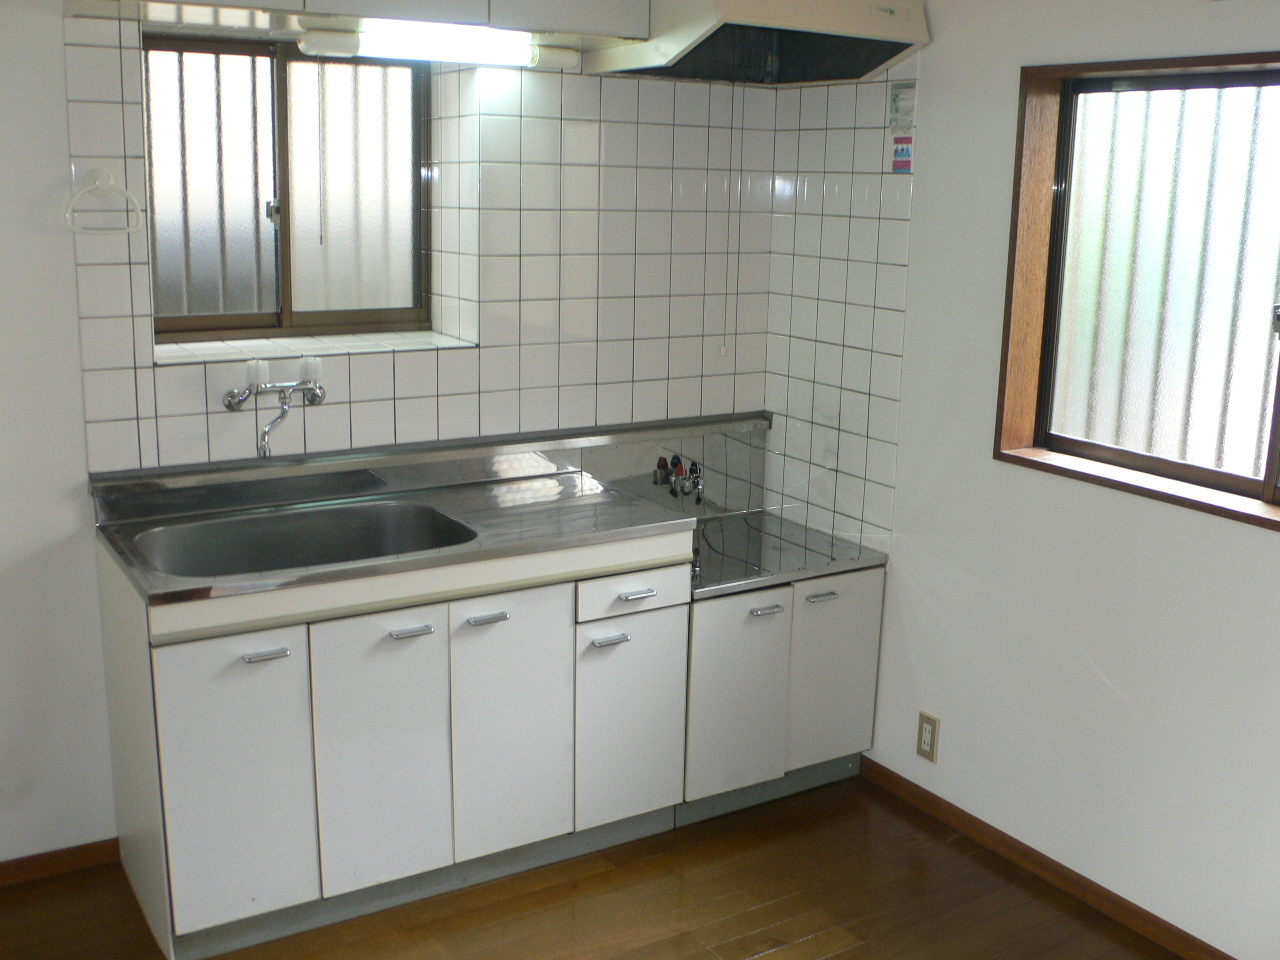 Kitchen. There is a window is bright kitchen.